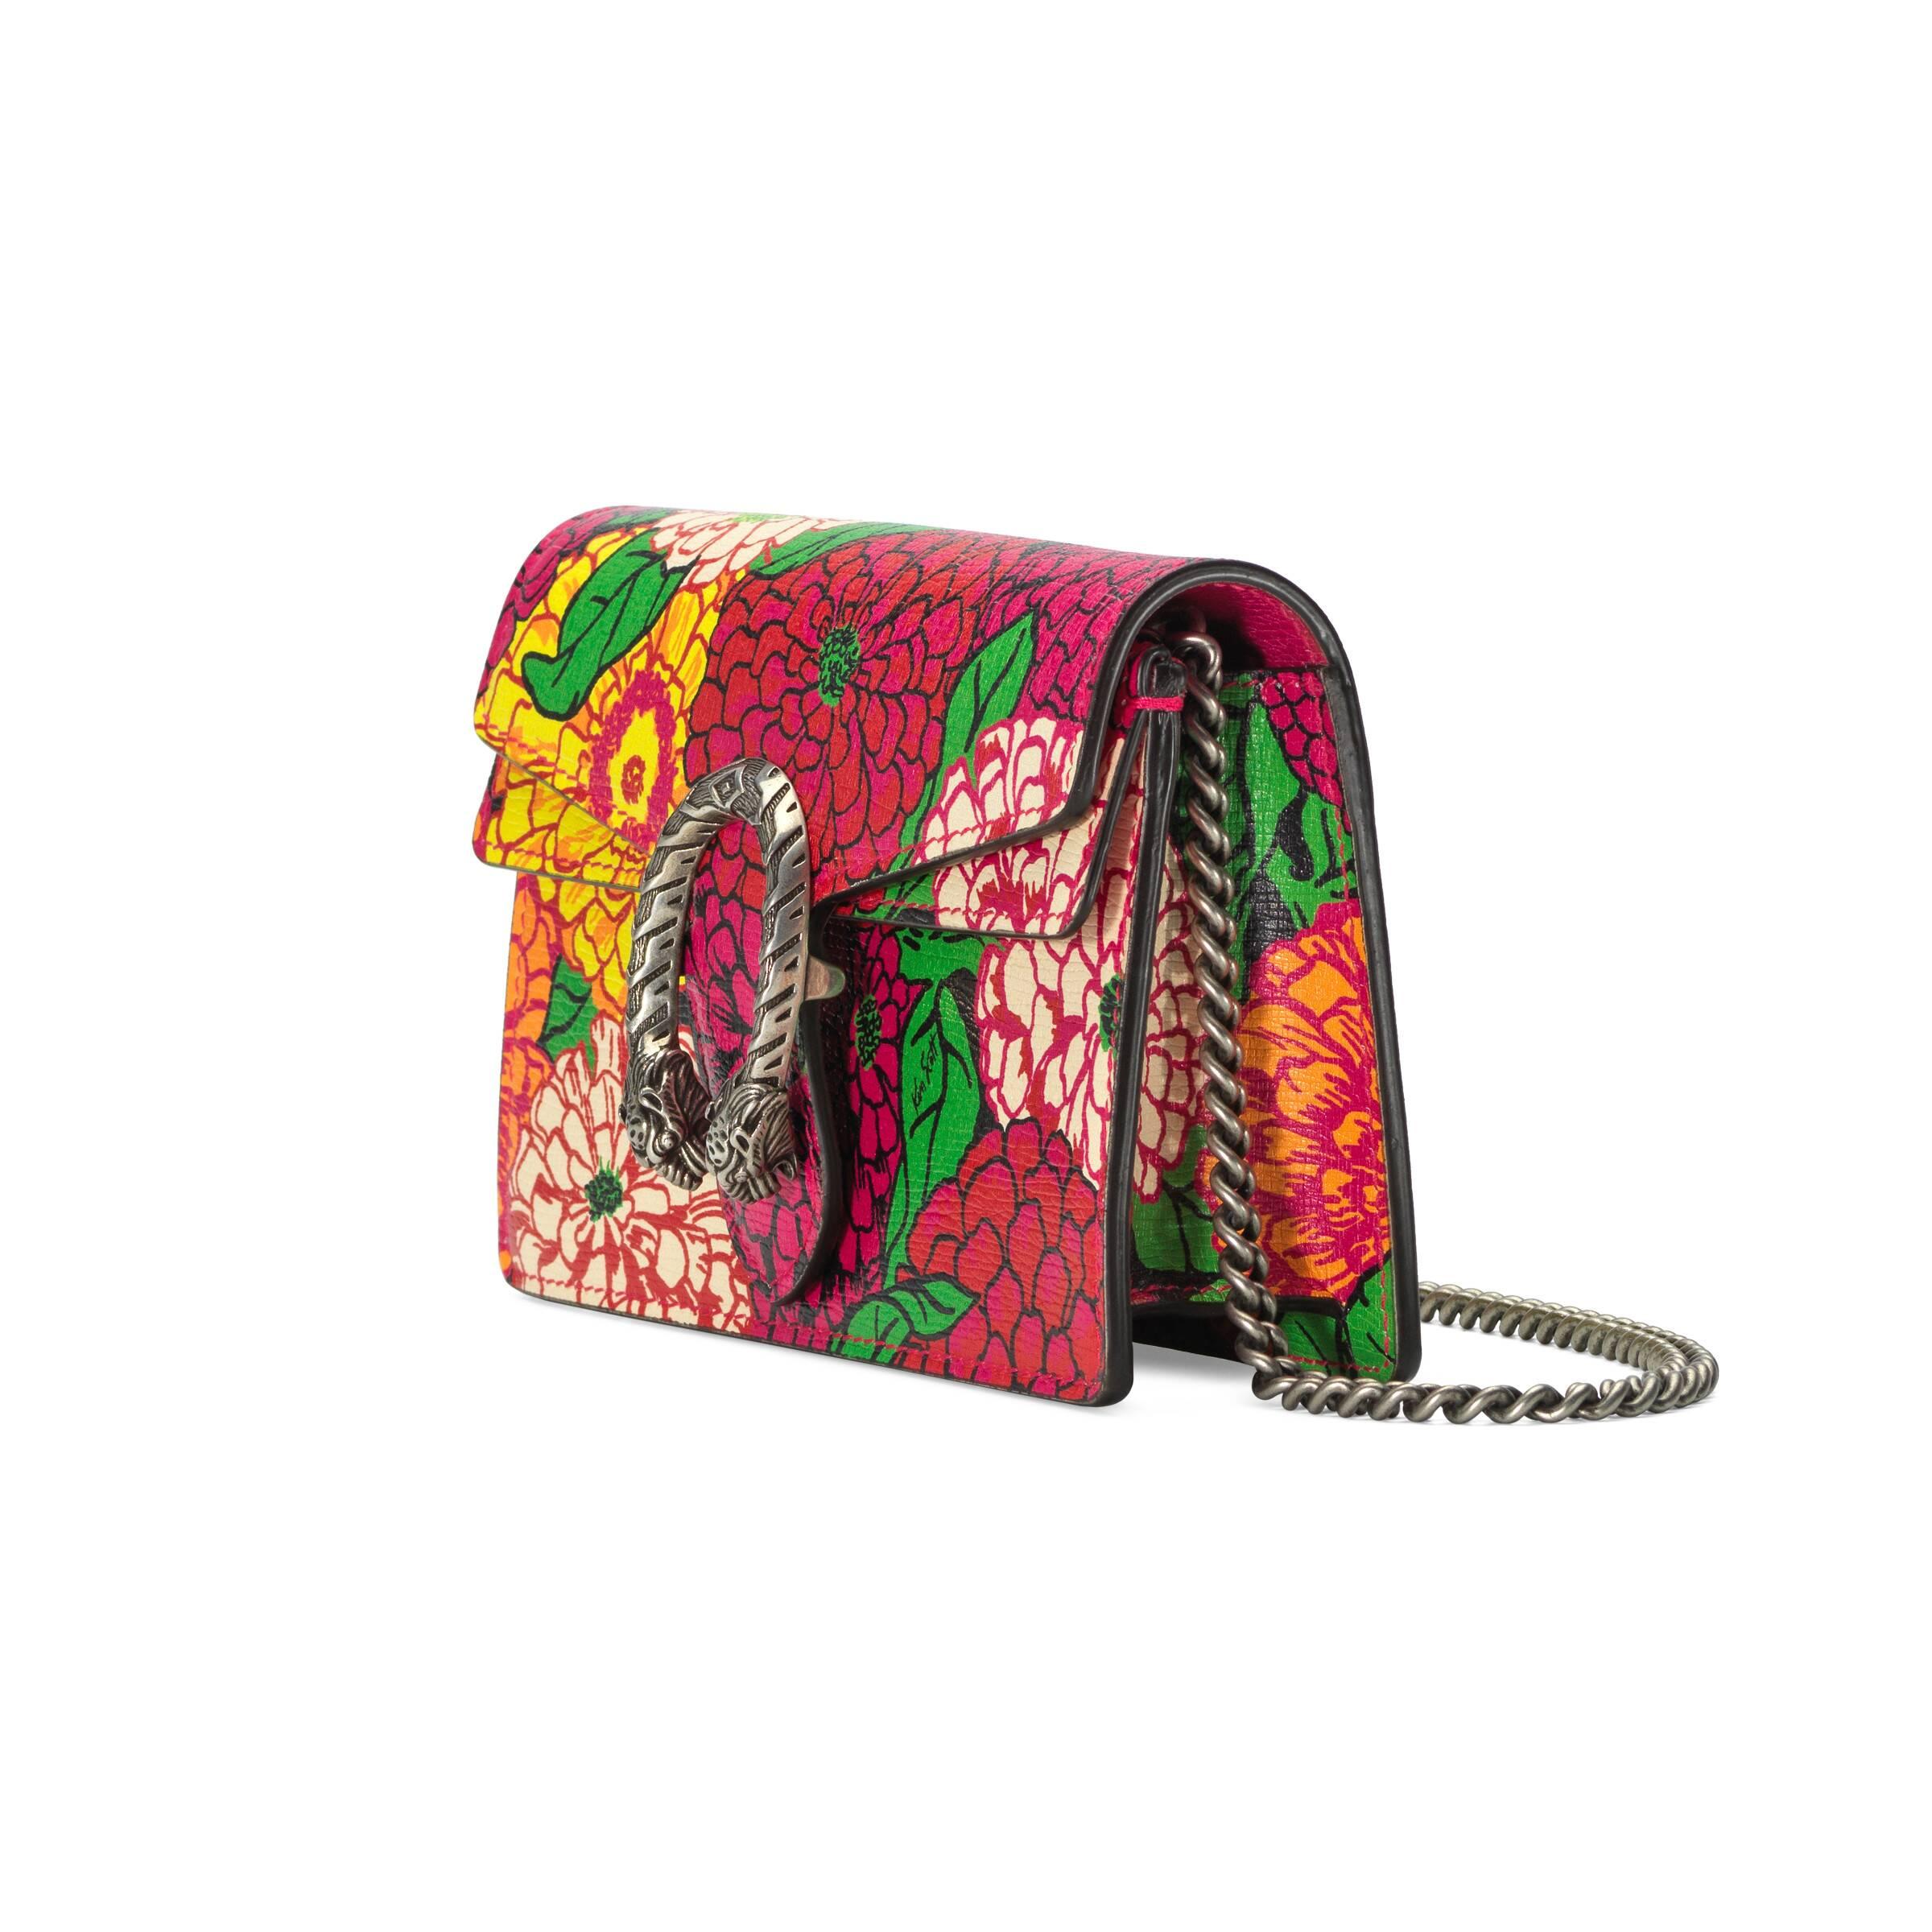 GUCCI Dionysus super mini leather-trimmed printed coated-canvas